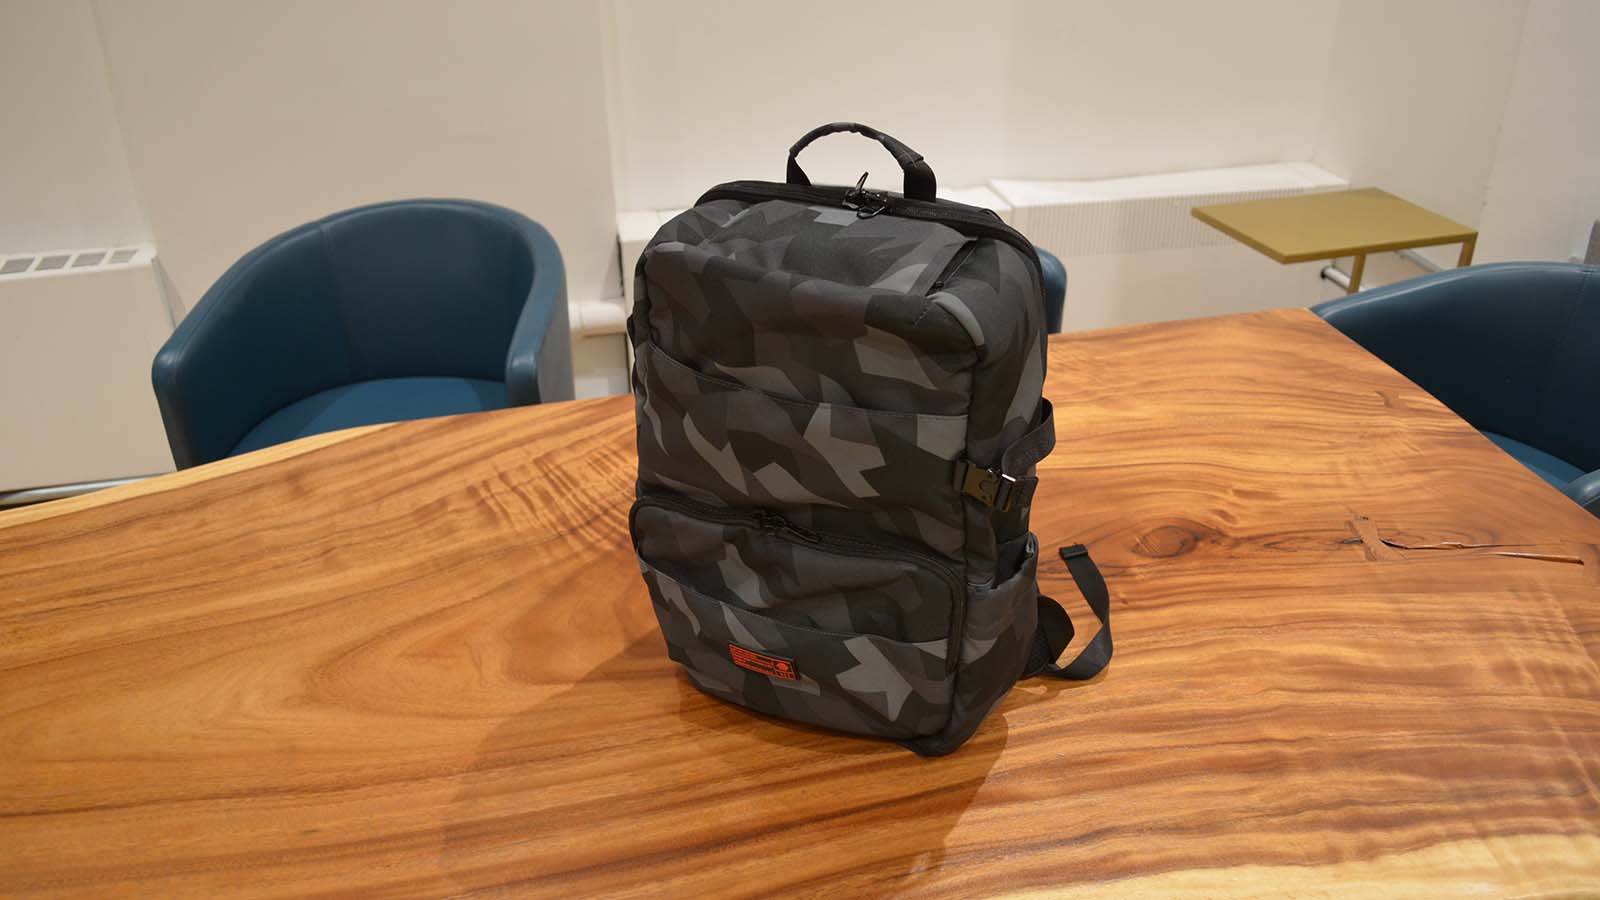 A Hex Technical backpack on a polished woodgrain table